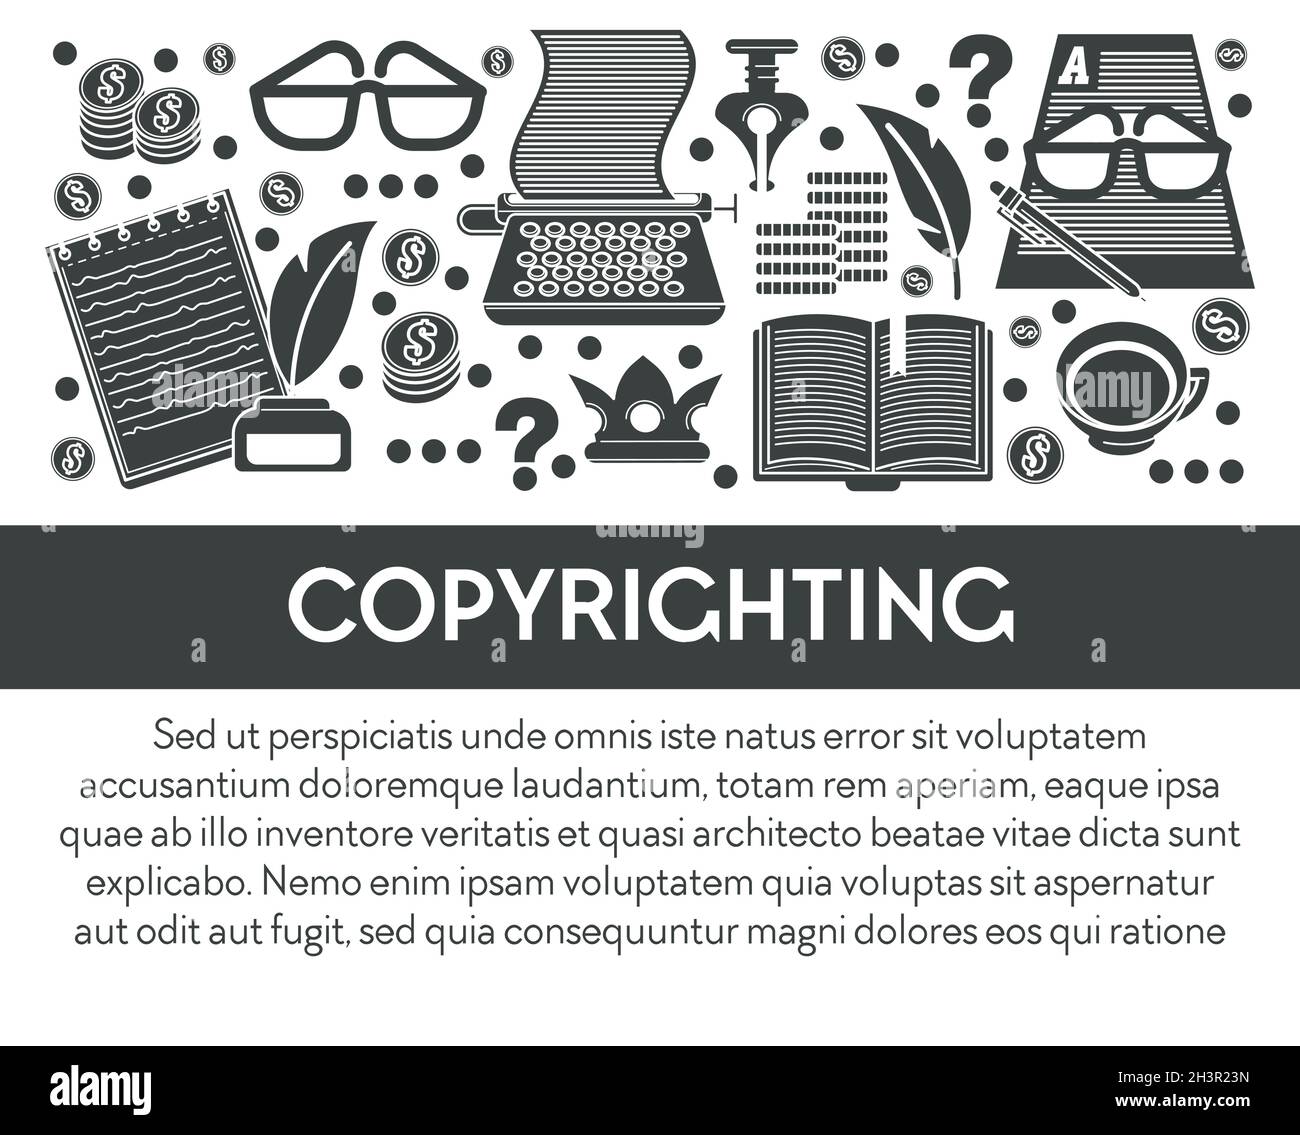 Copyrighting and intellectual property, writing tools and equipment Stock Vector